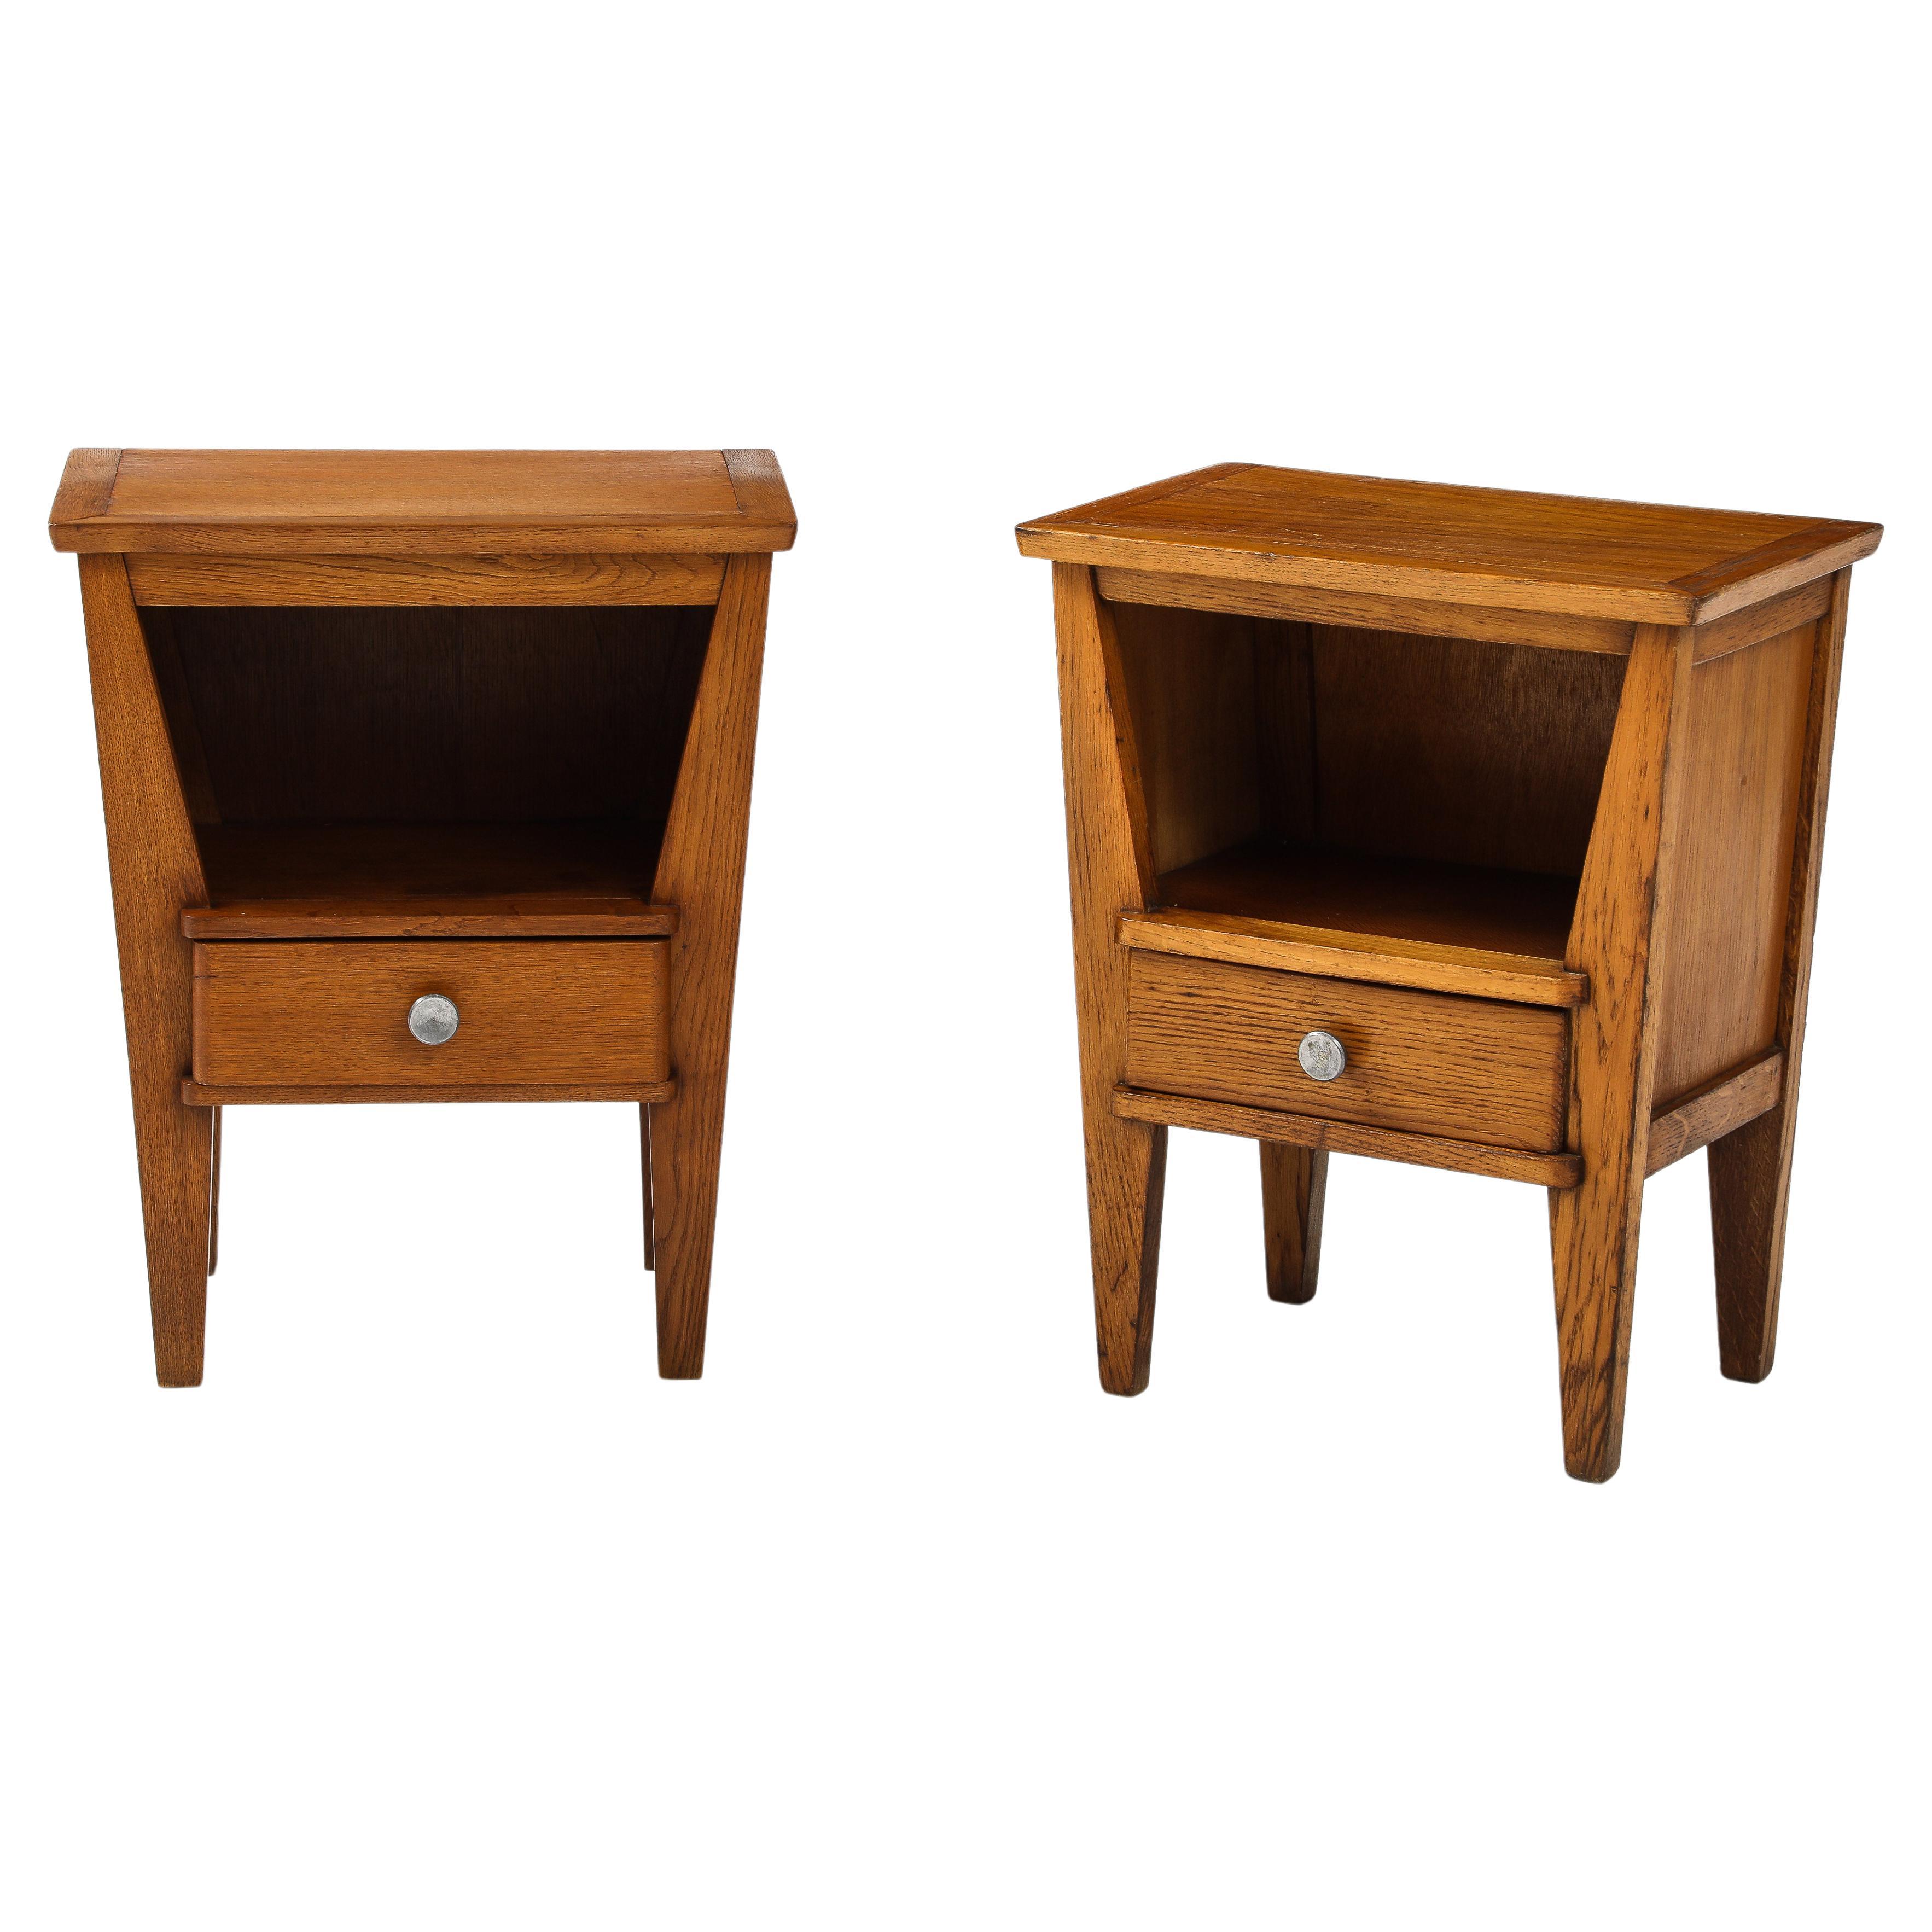 Pair of Rene Gabriel Night Tables, France, c. 1945, stamped